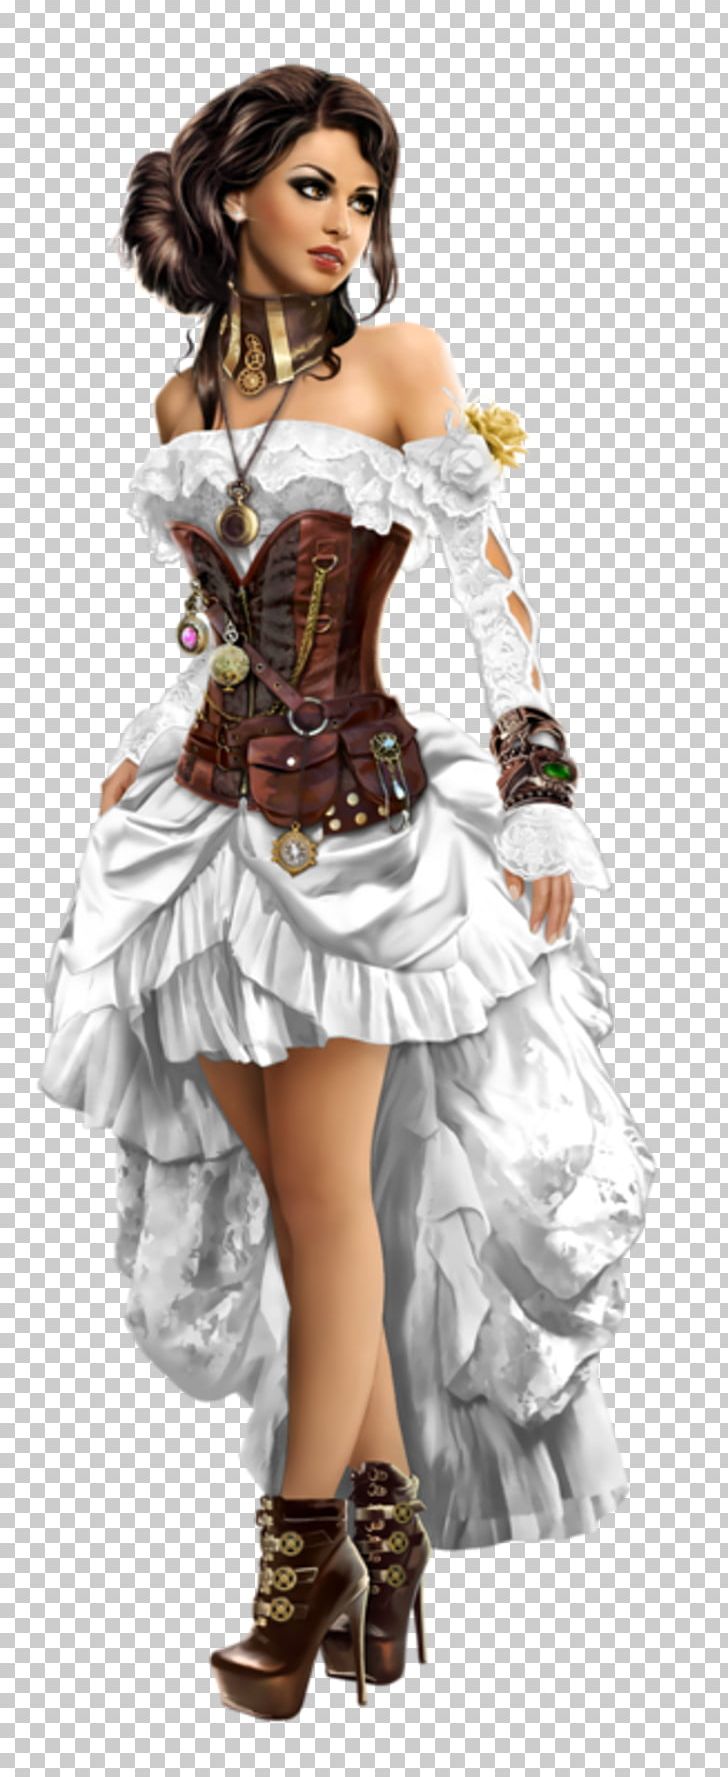 Woman Girl Steampunk Clothing Pin PNG, Clipart, Cari, Clothing, Costume, Costume Design, Creation Free PNG Download